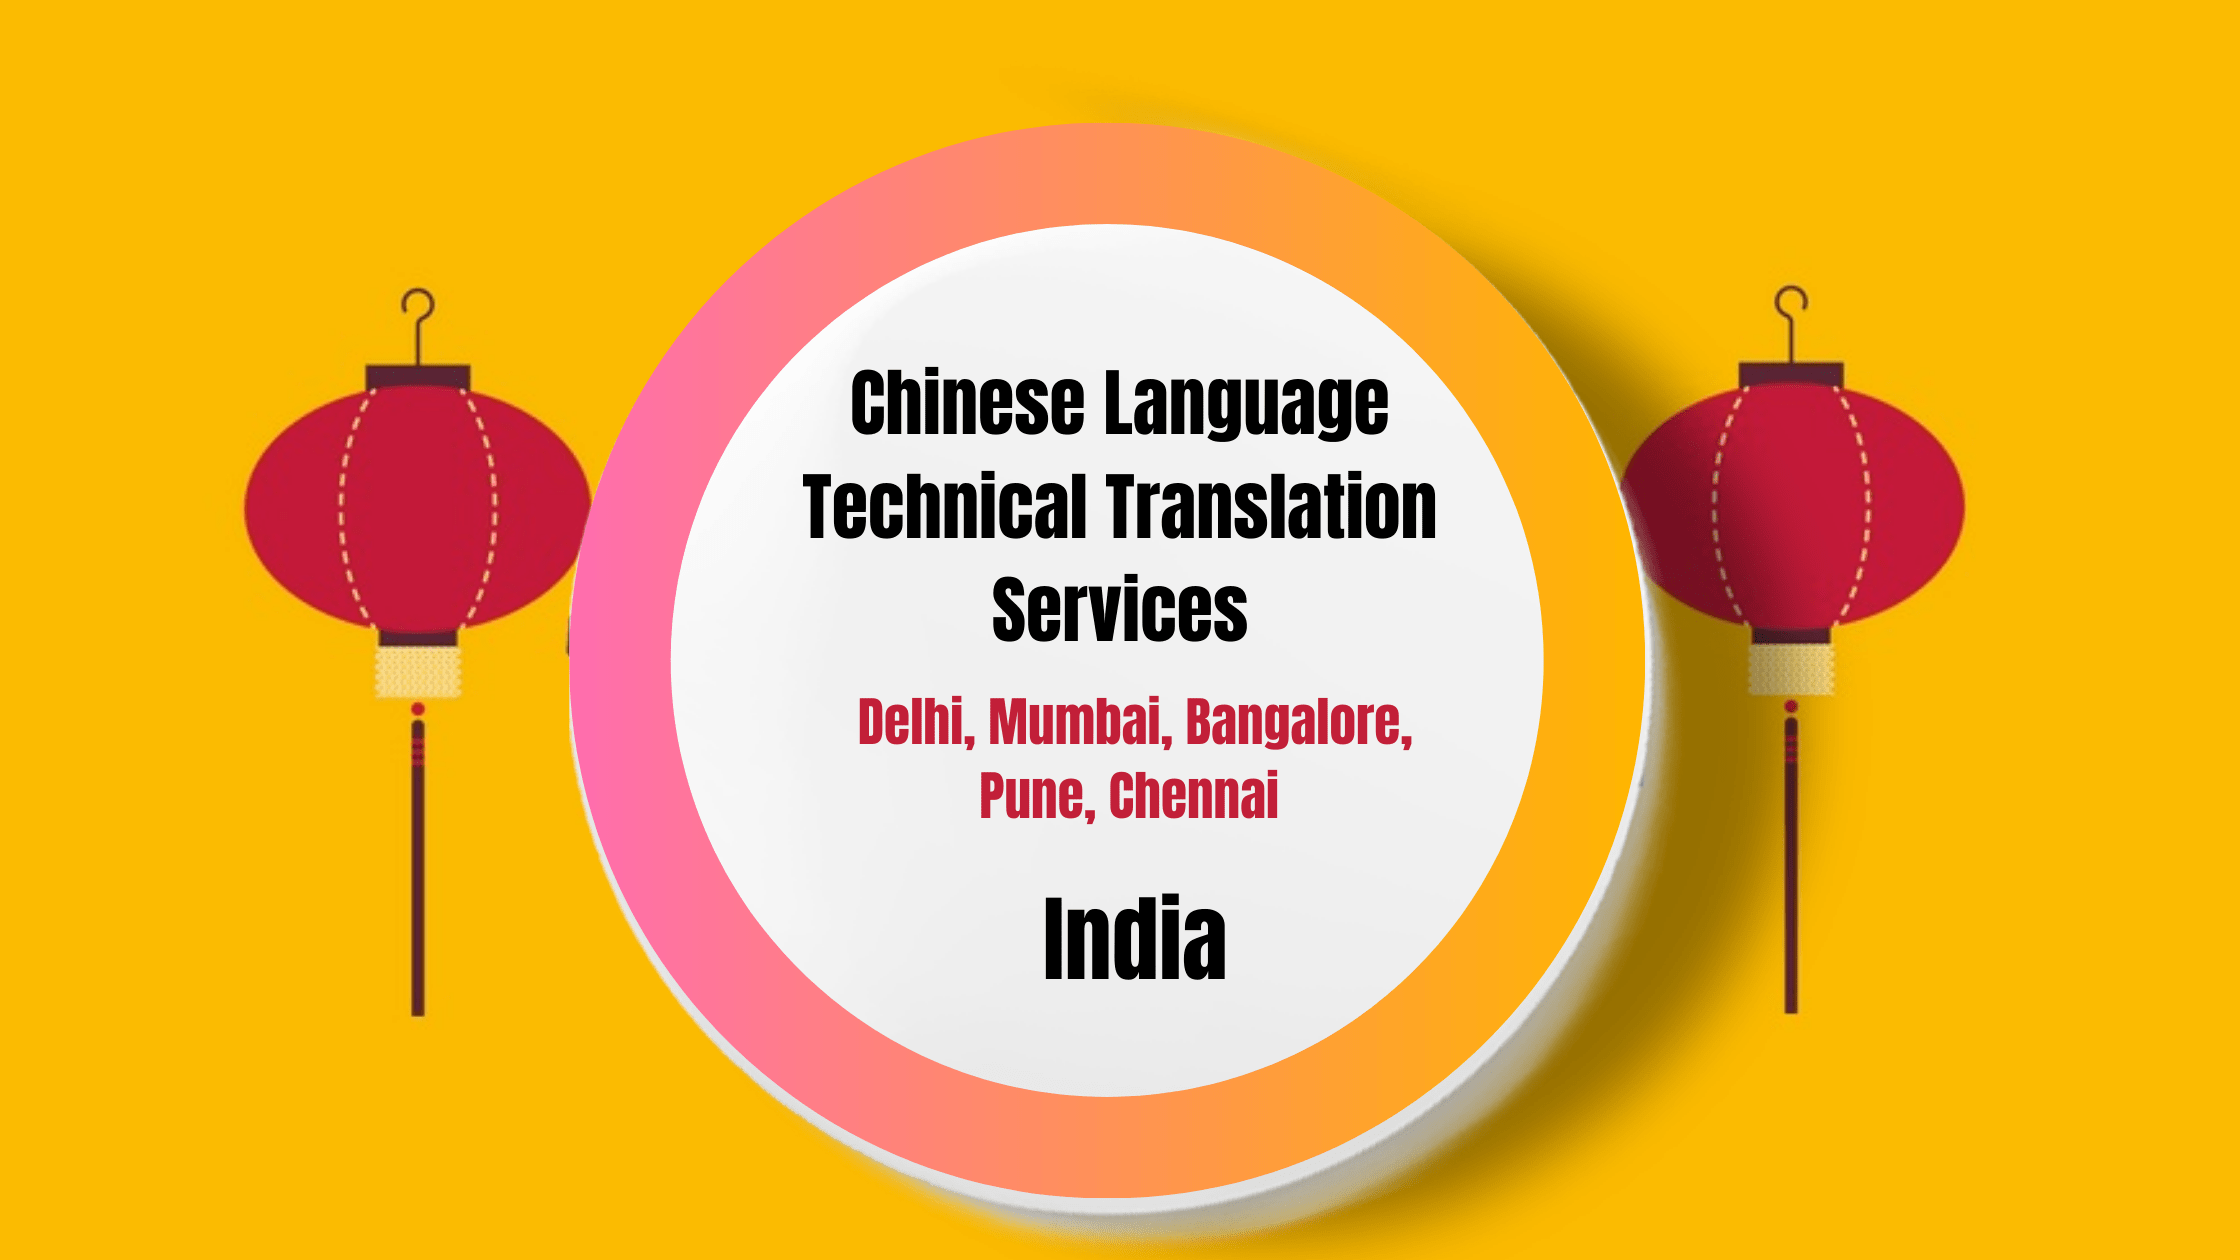 Chinese Language Technical Translation Services in India